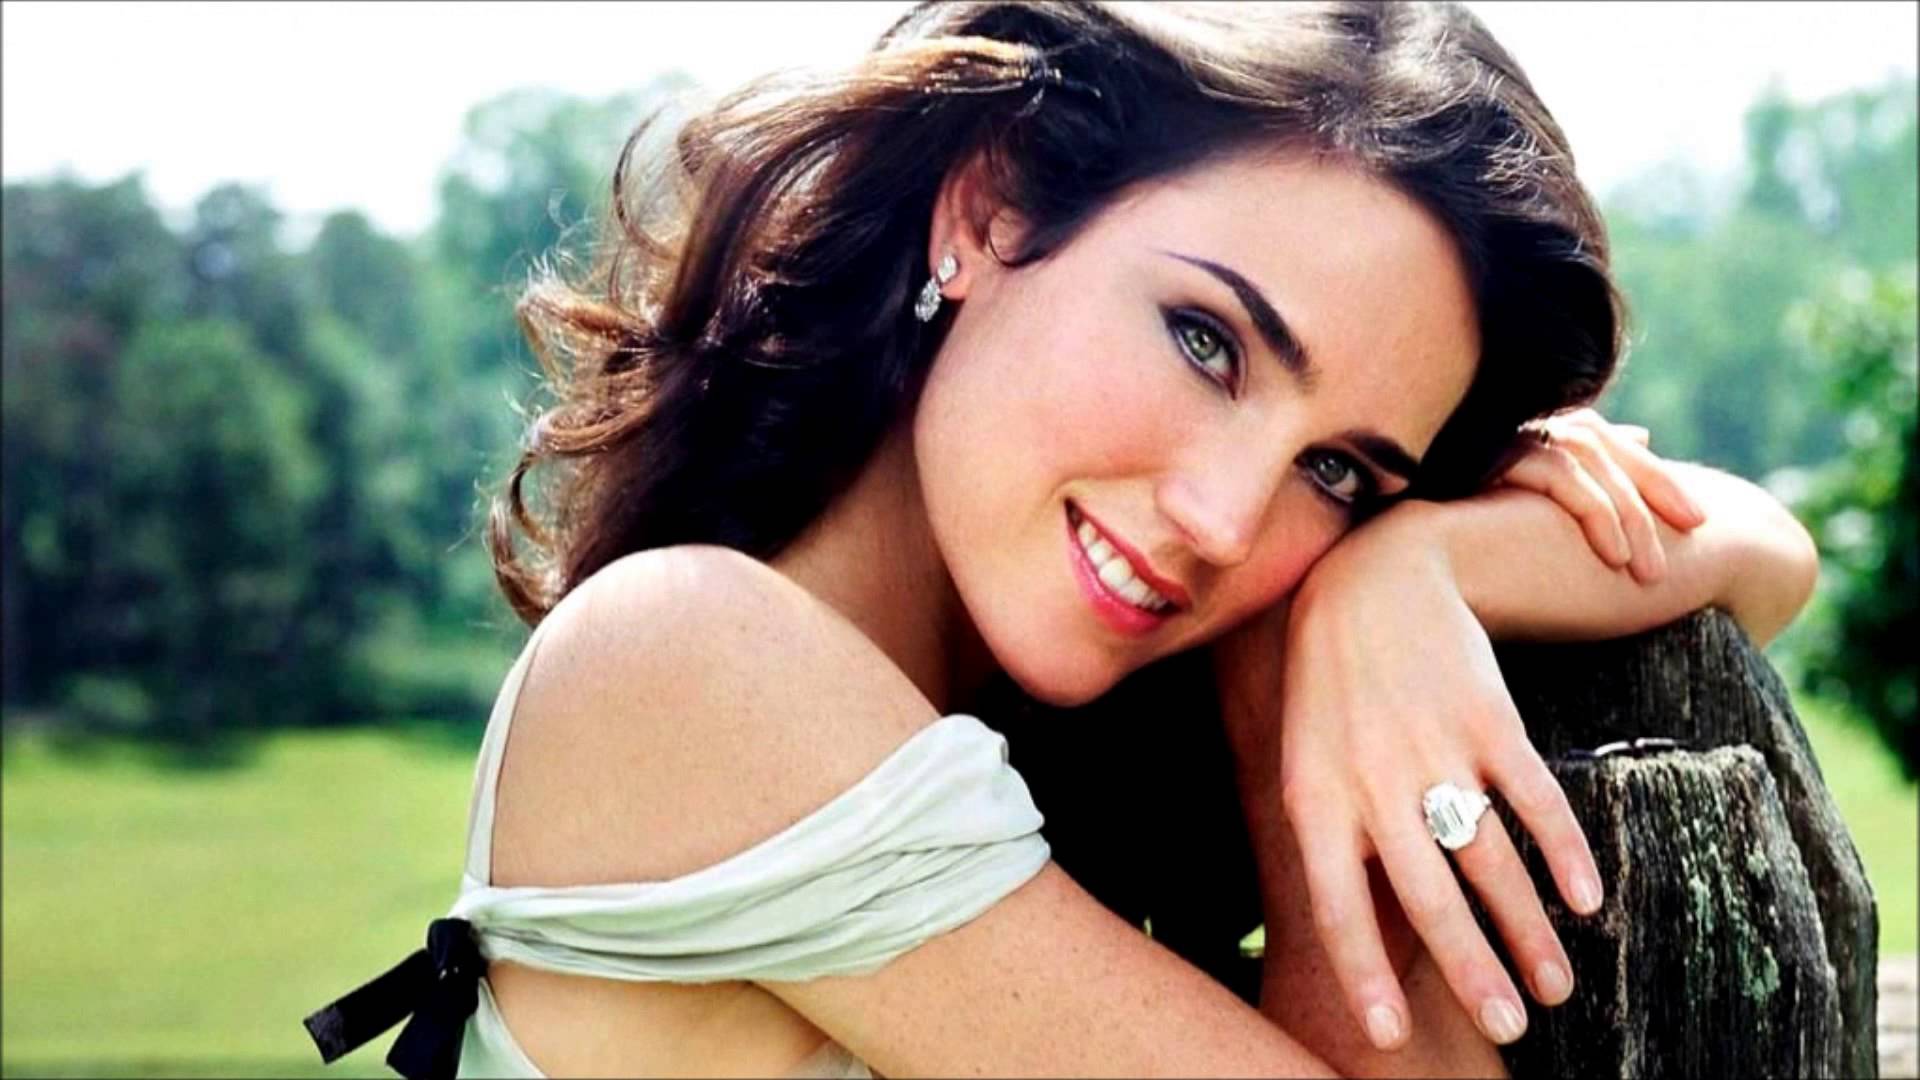 Download Jennifer Connelly Long Curly Hair Wallpaper